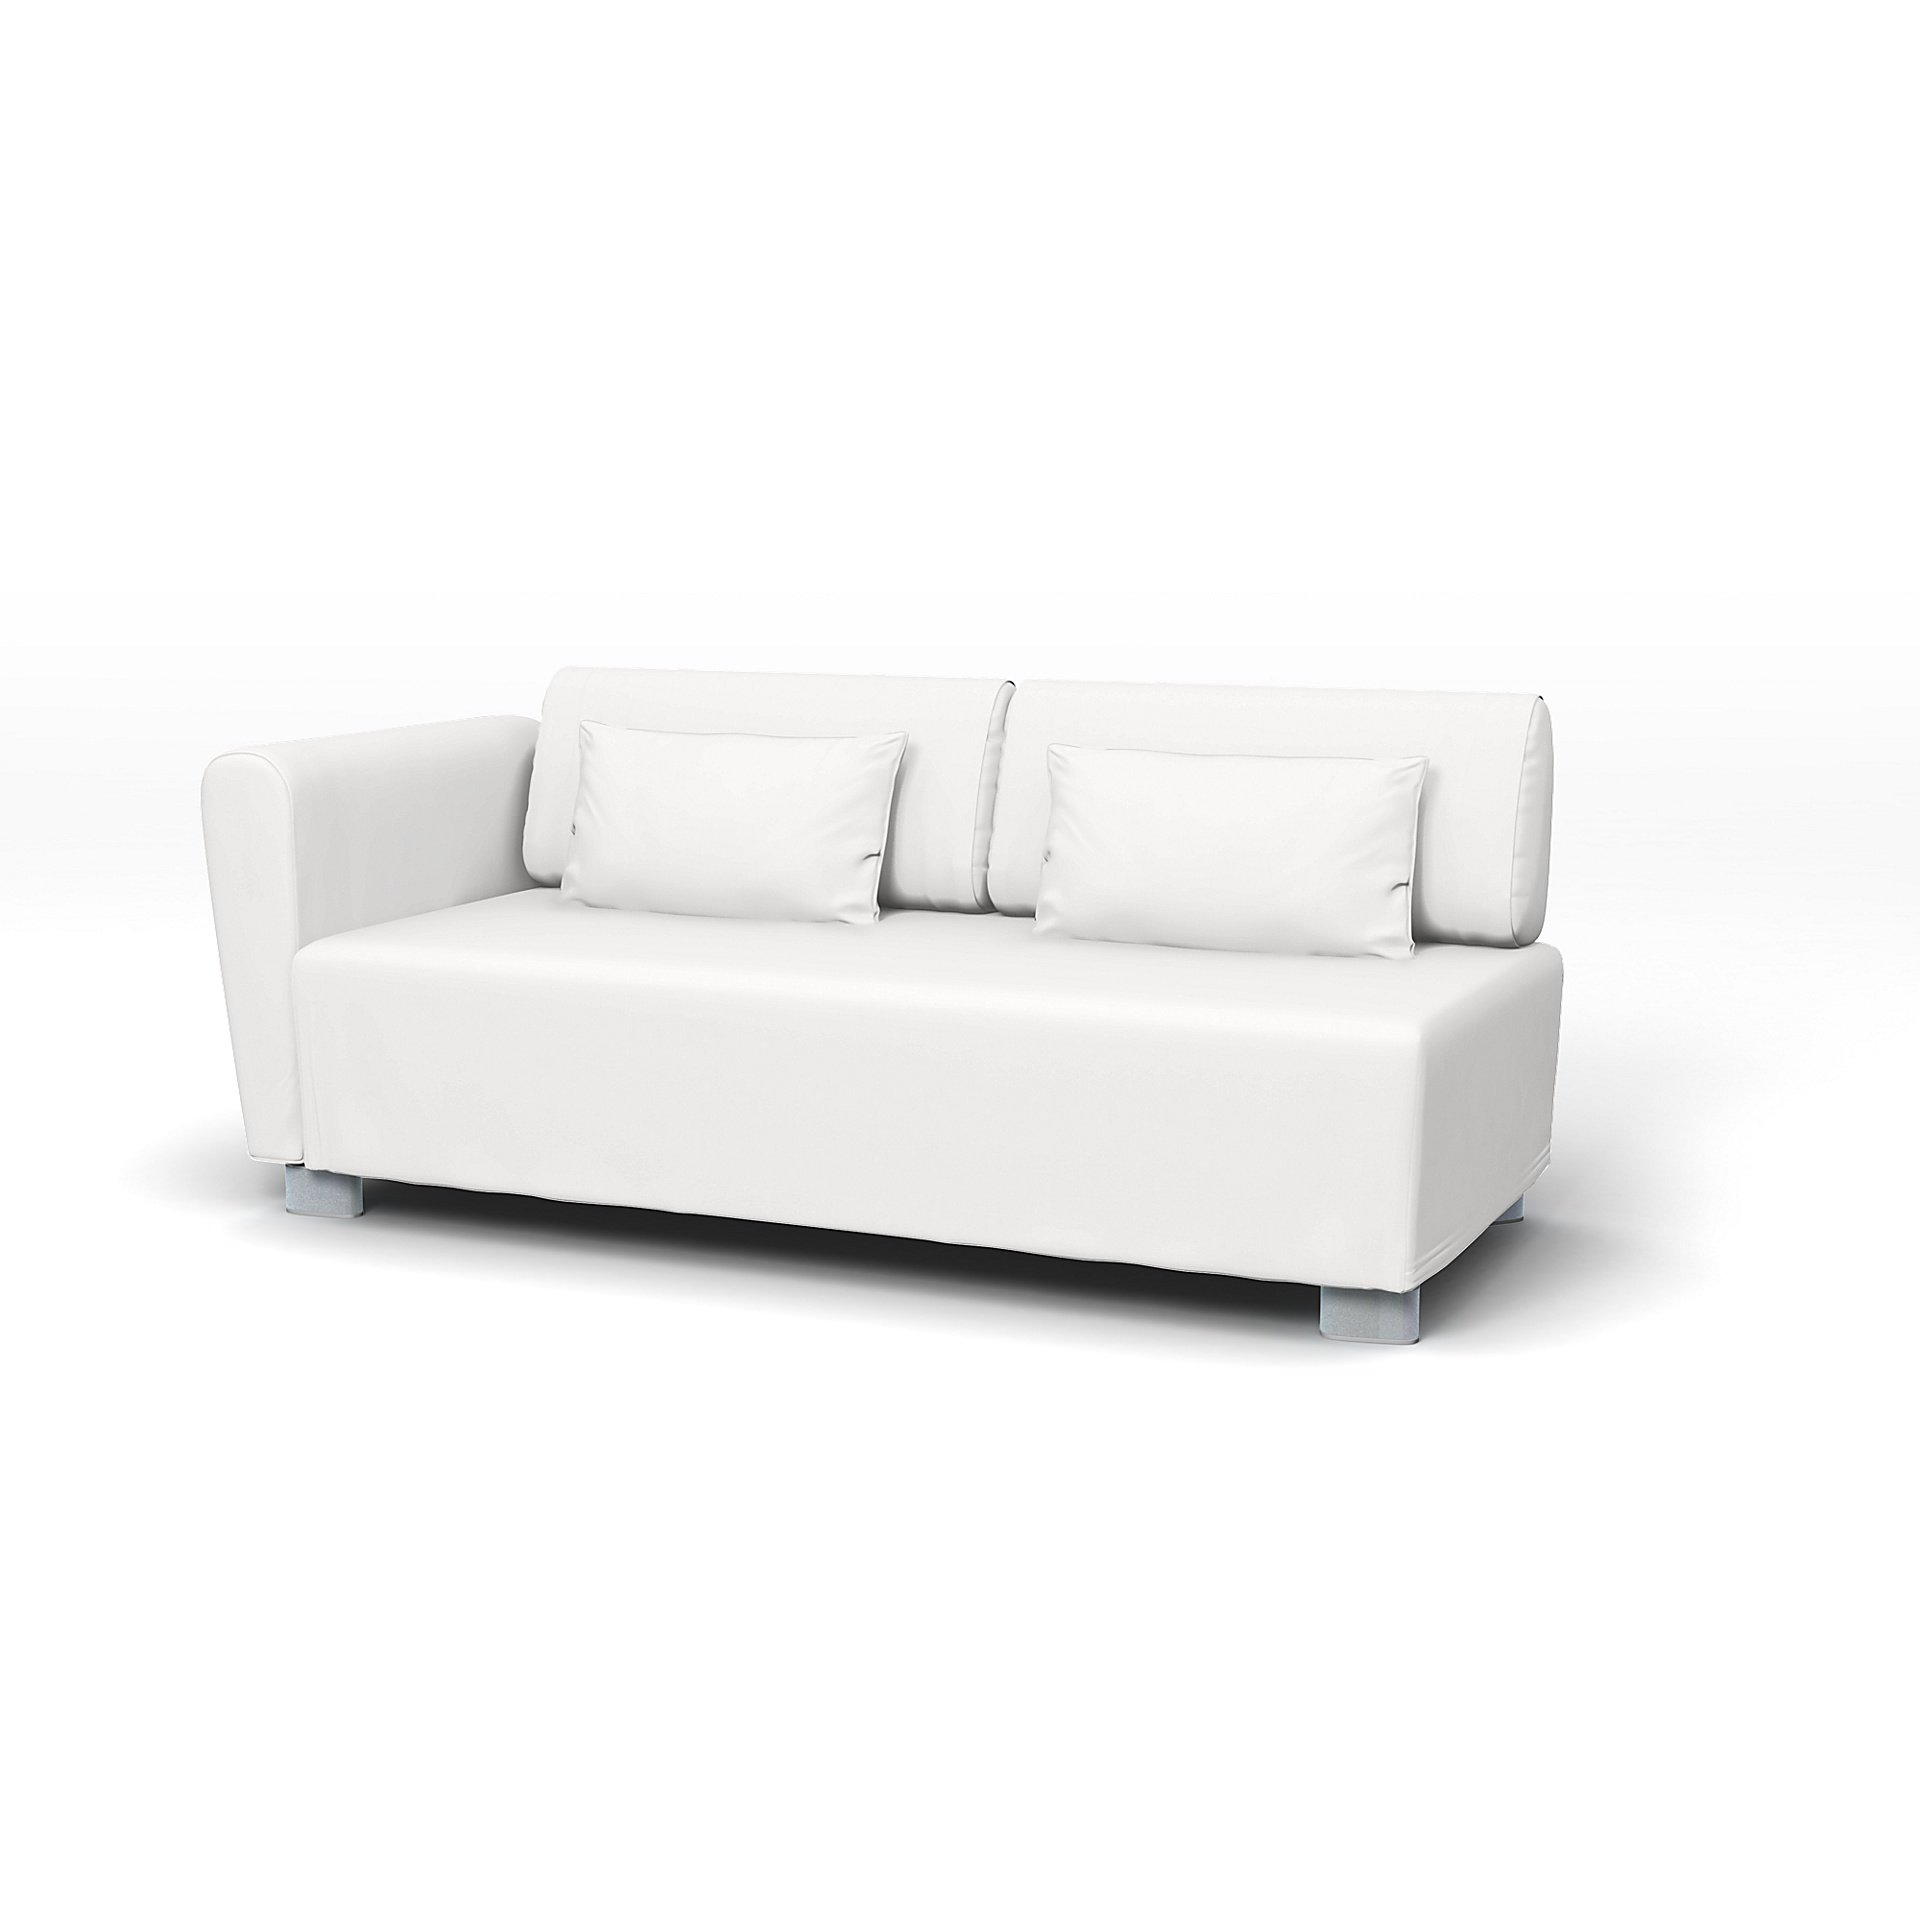 IKEA - Mysinge 2 Seater Sofa with Armrest Cover, Absolute White, Cotton - Bemz